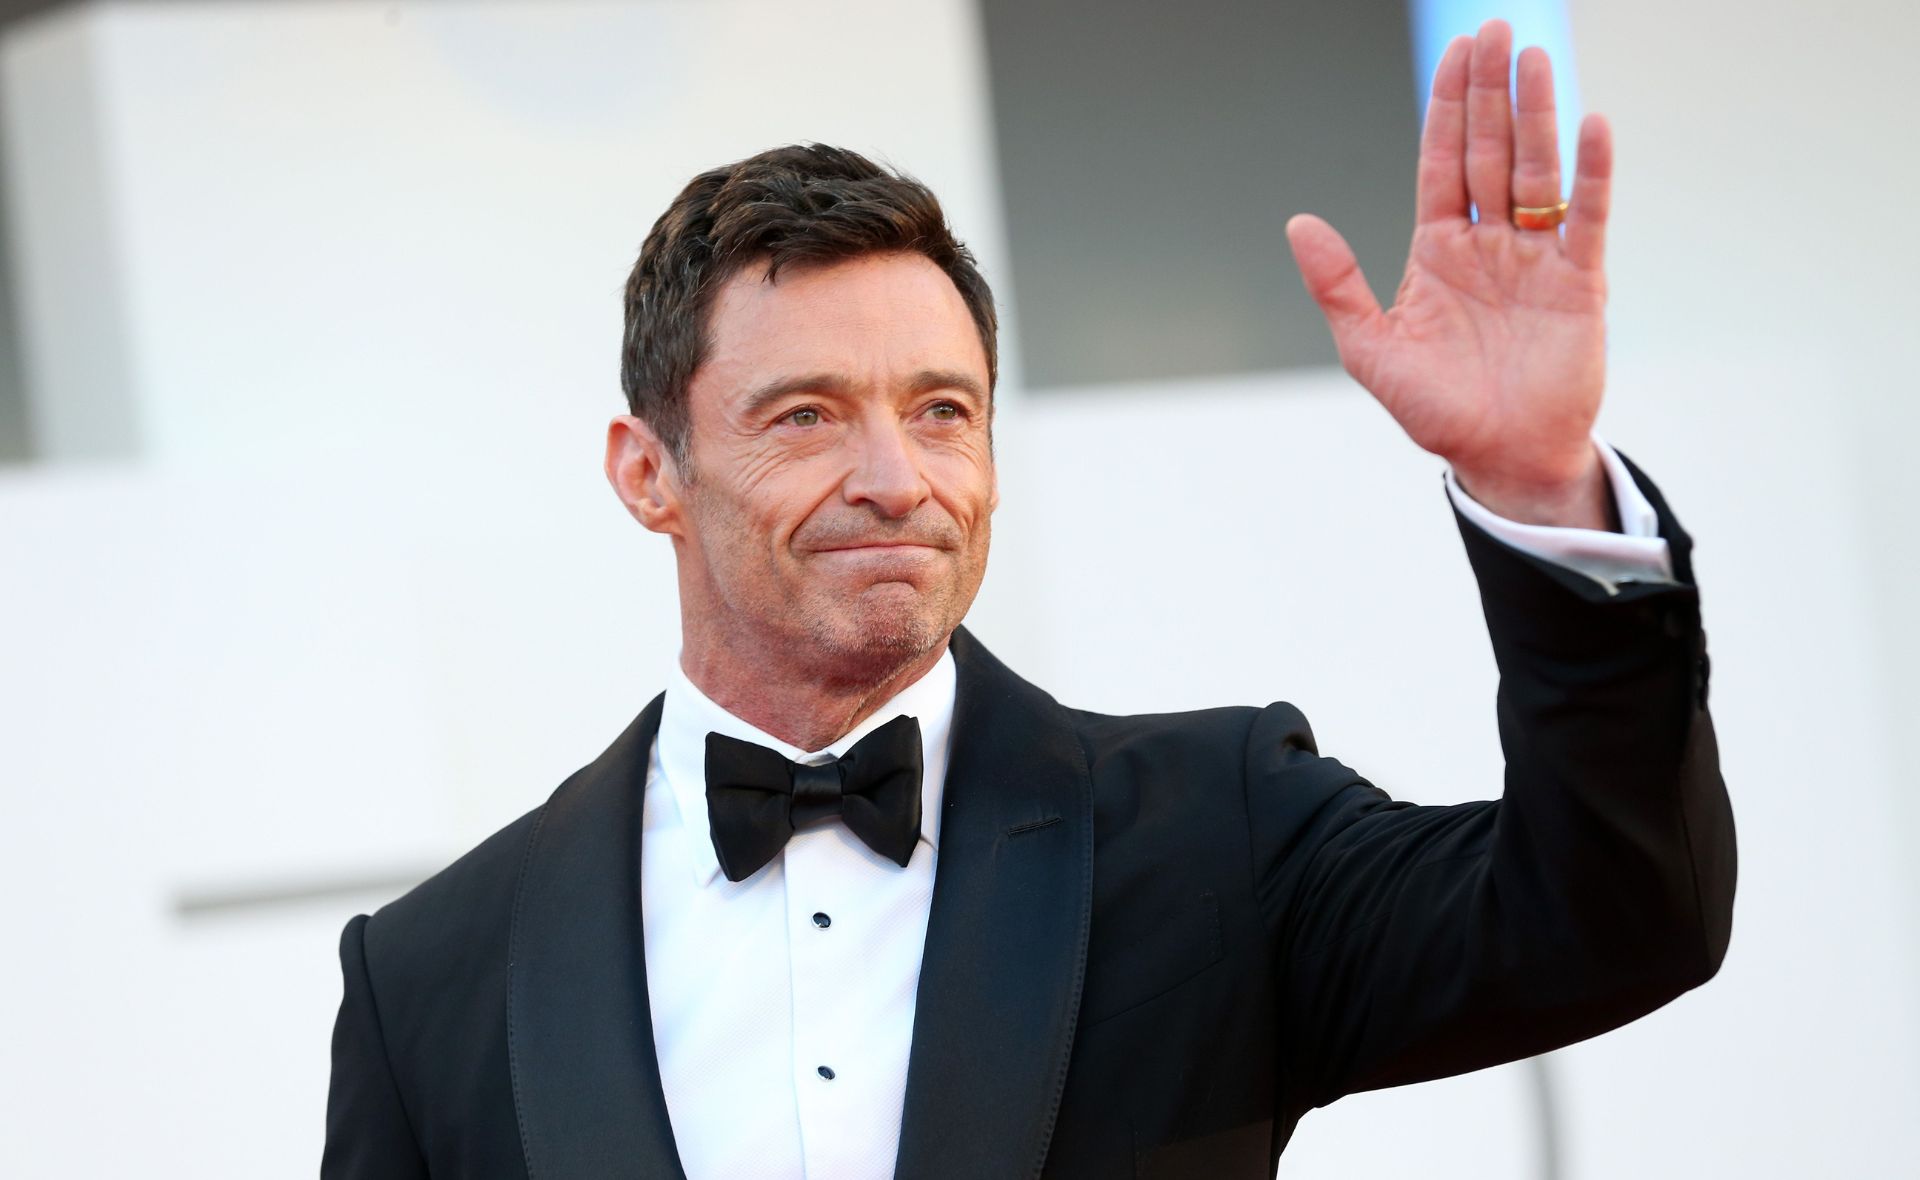 “I knew it was kind of a goodbye”: Hugh Jackman opens up on his grief after dad’s passed